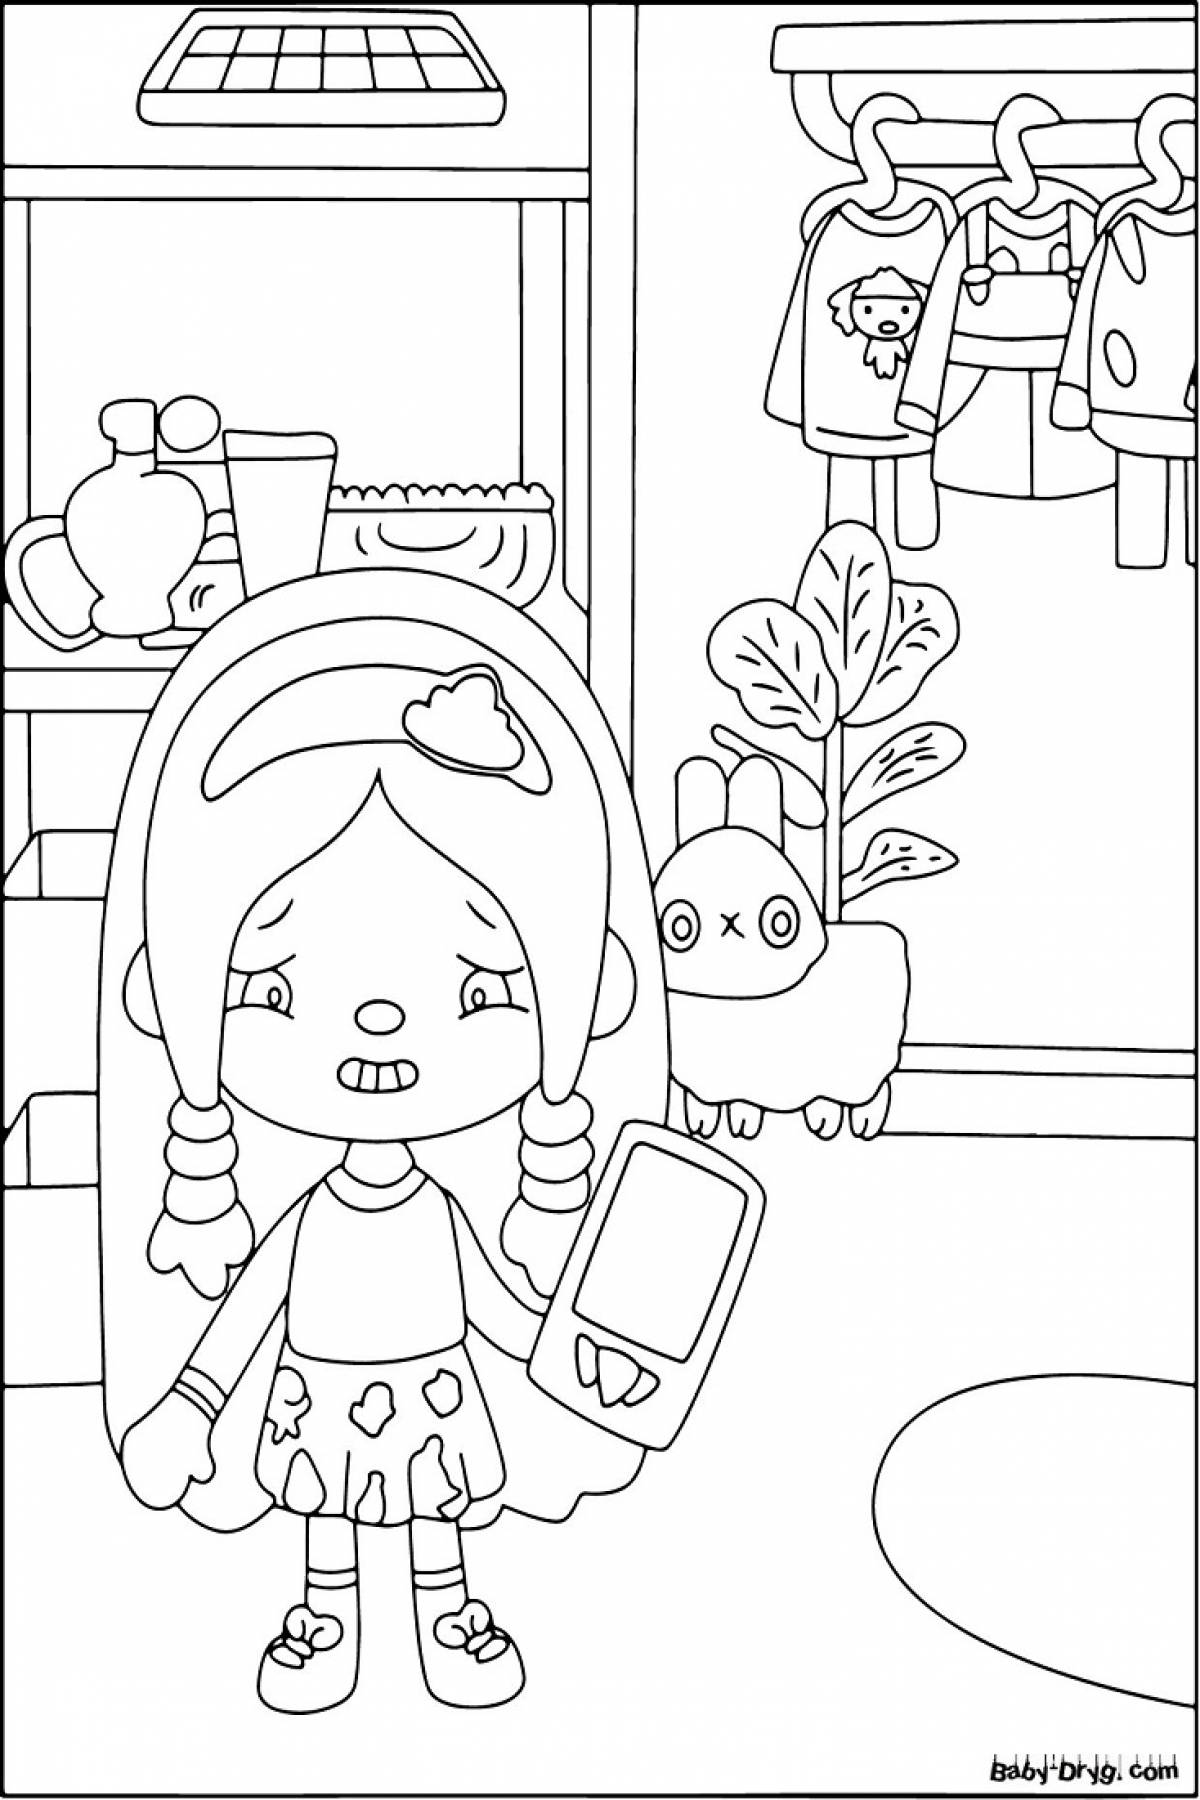 Abstract toilet coloring page from the current side